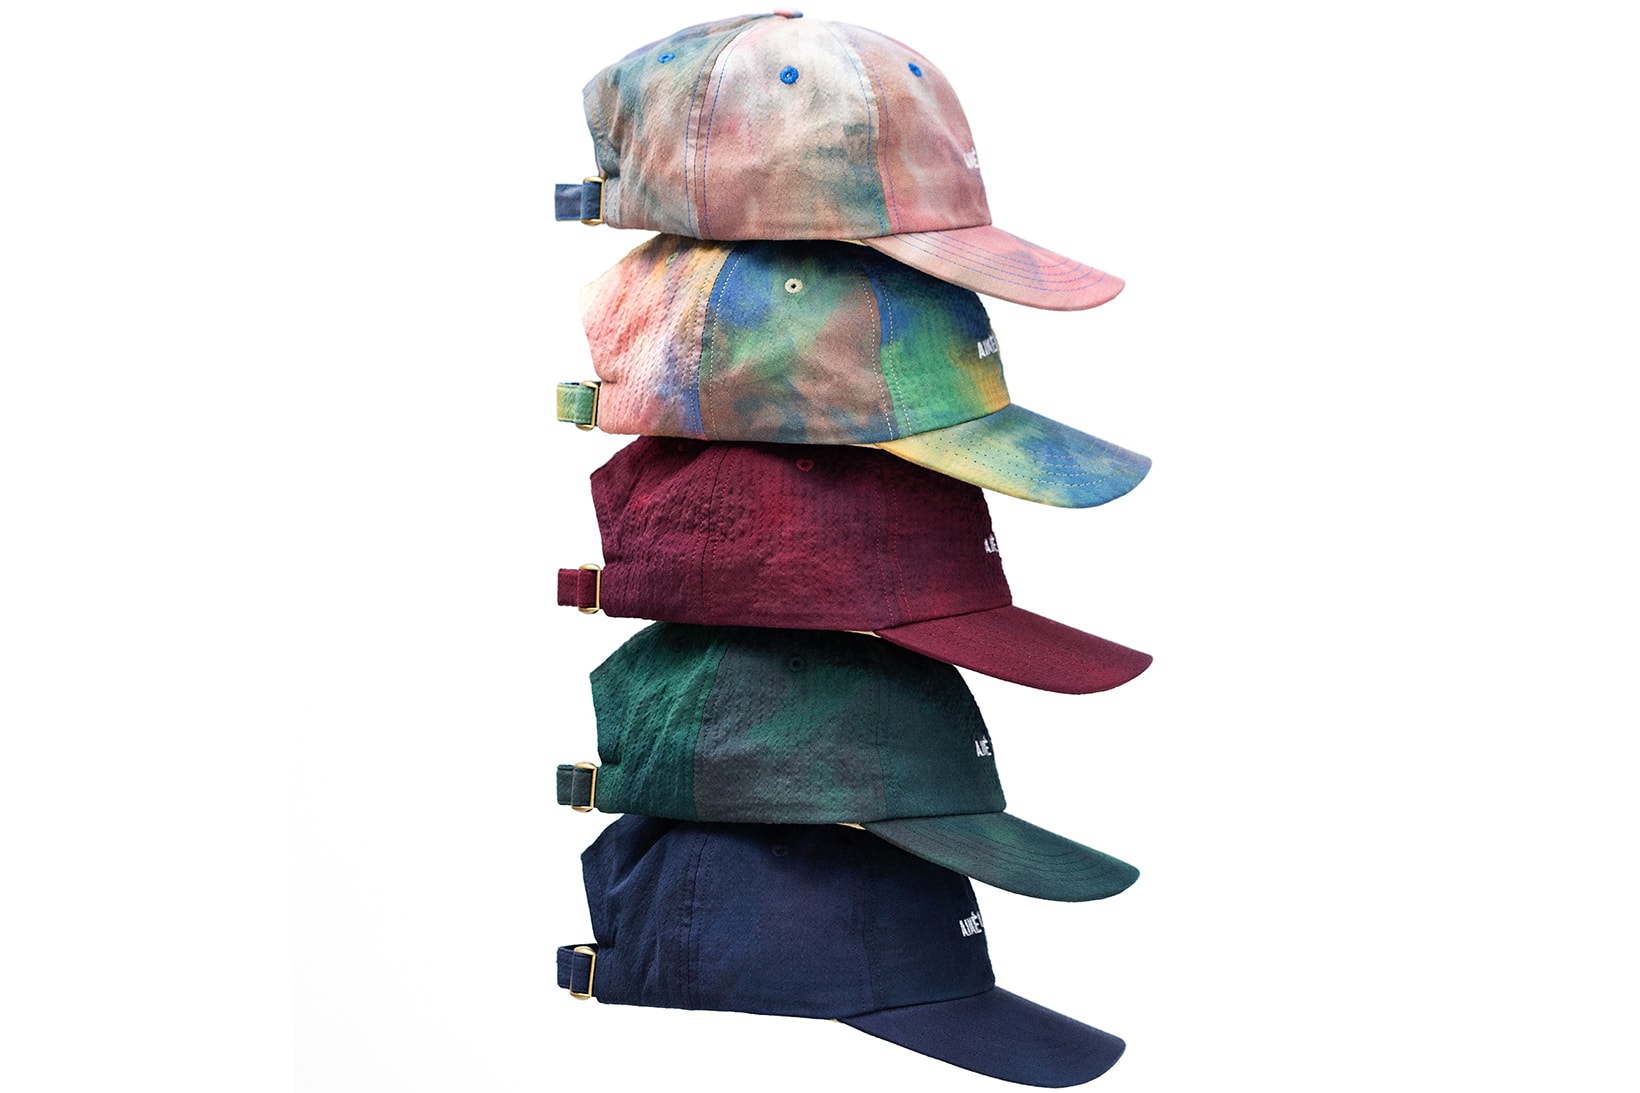 Aime Leon Dore Spring Summer 2018 Leisure Hats caps tie dye maroon green navy dye cotton embroidery drop release launch april 20 2018